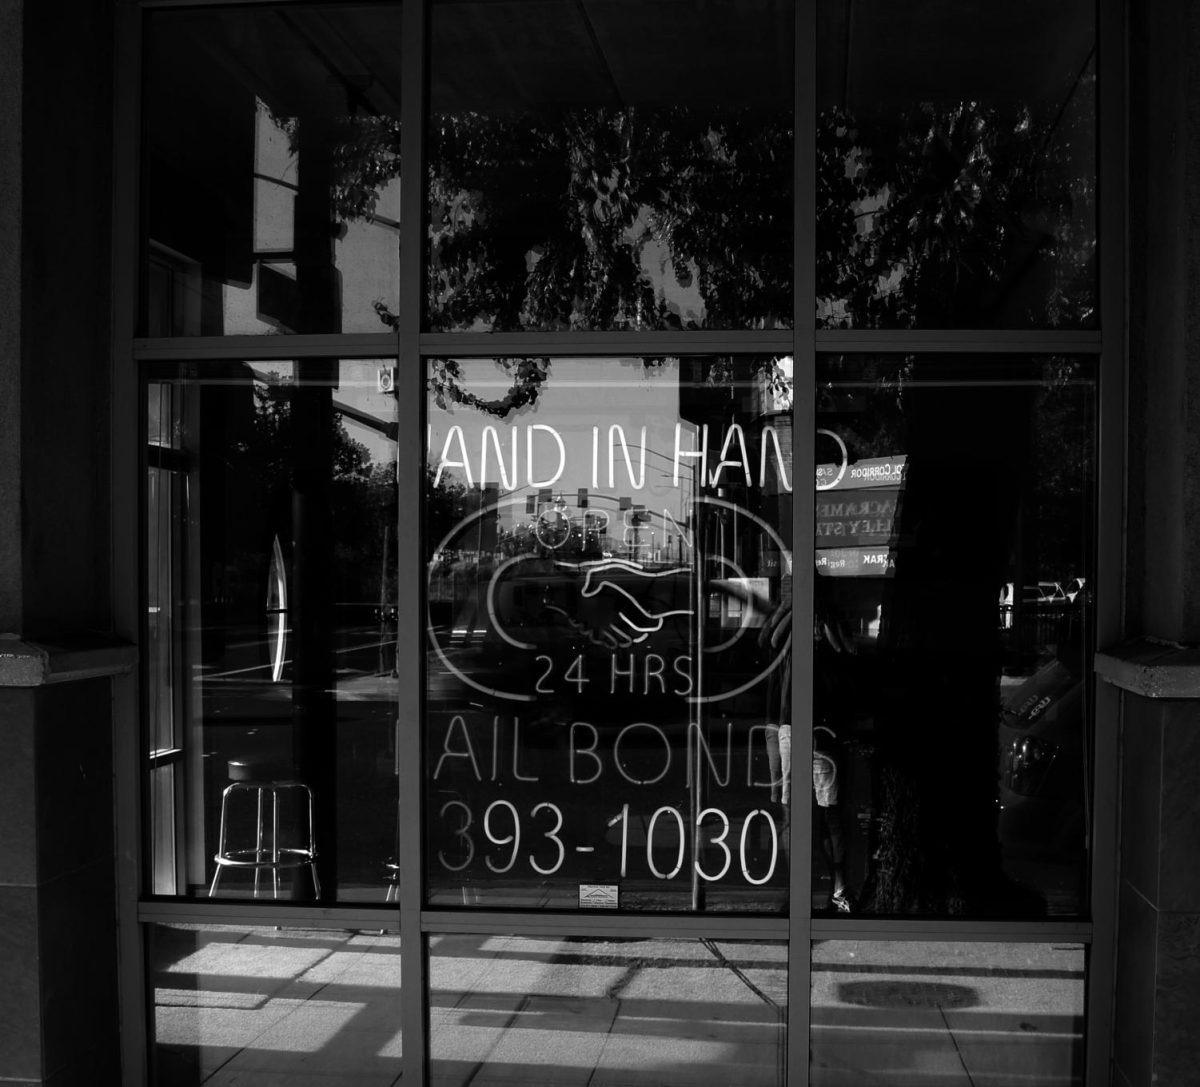 A 24-hour bail bond service located in Downtown Sacramento.